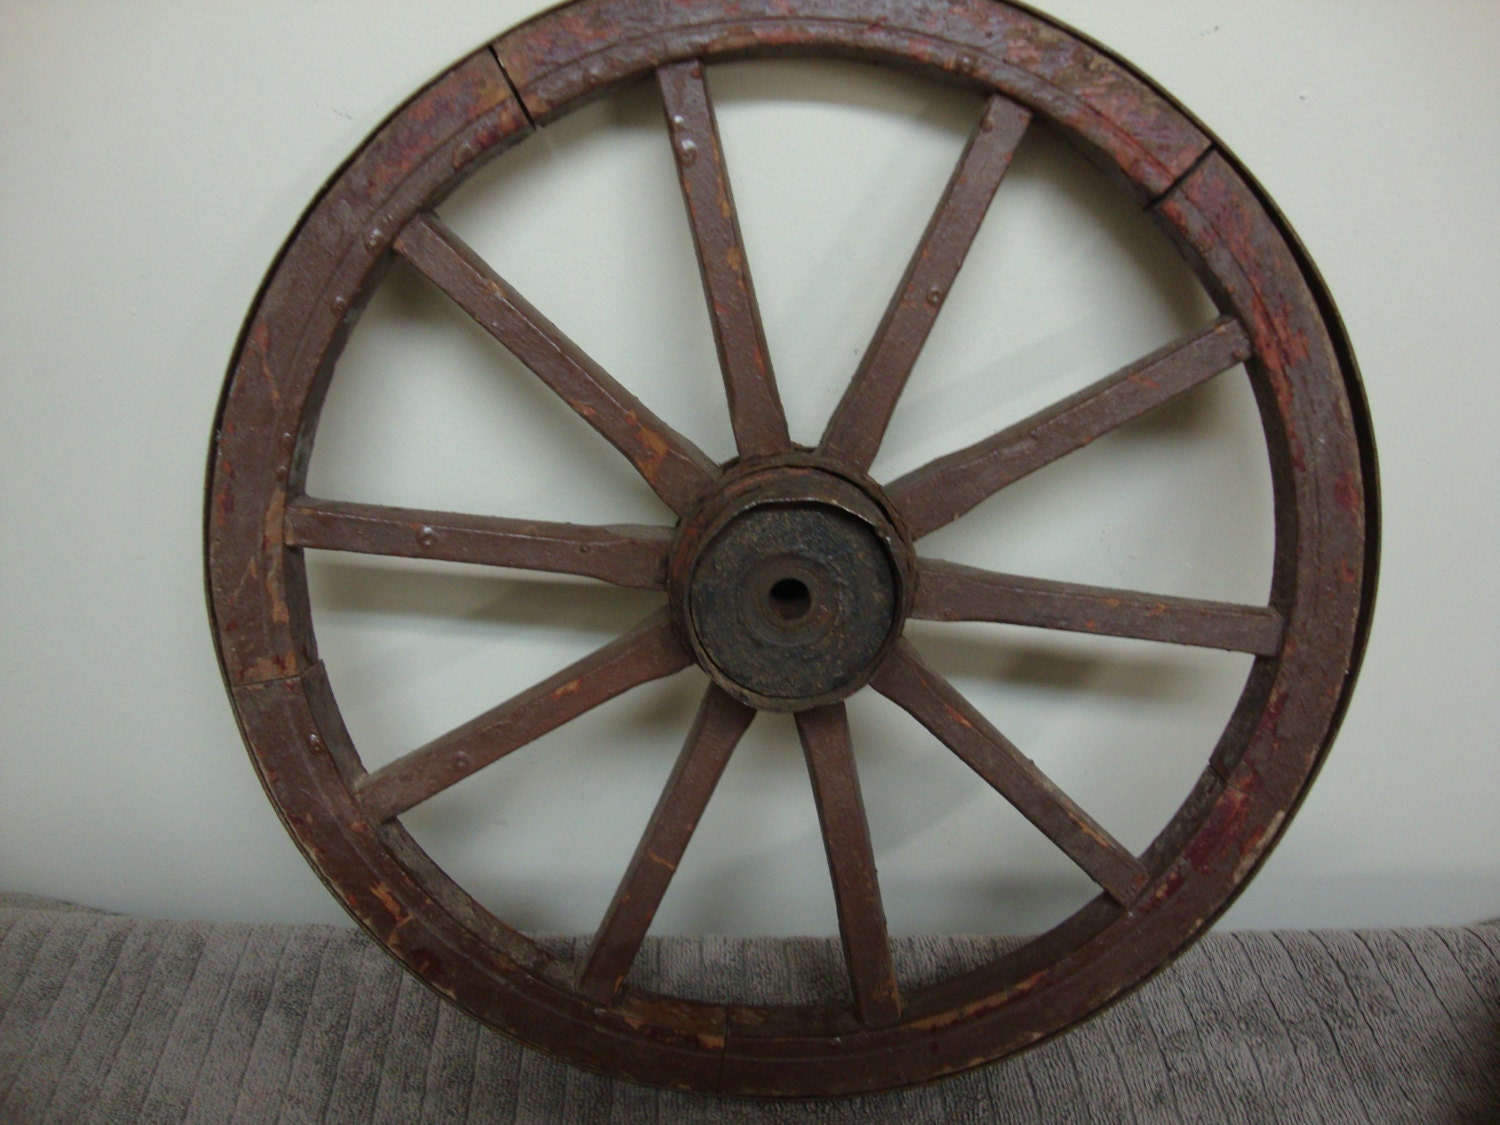 Antique Small Wood Spoke Wagon Cart Wheel by edsfinds on Etsy